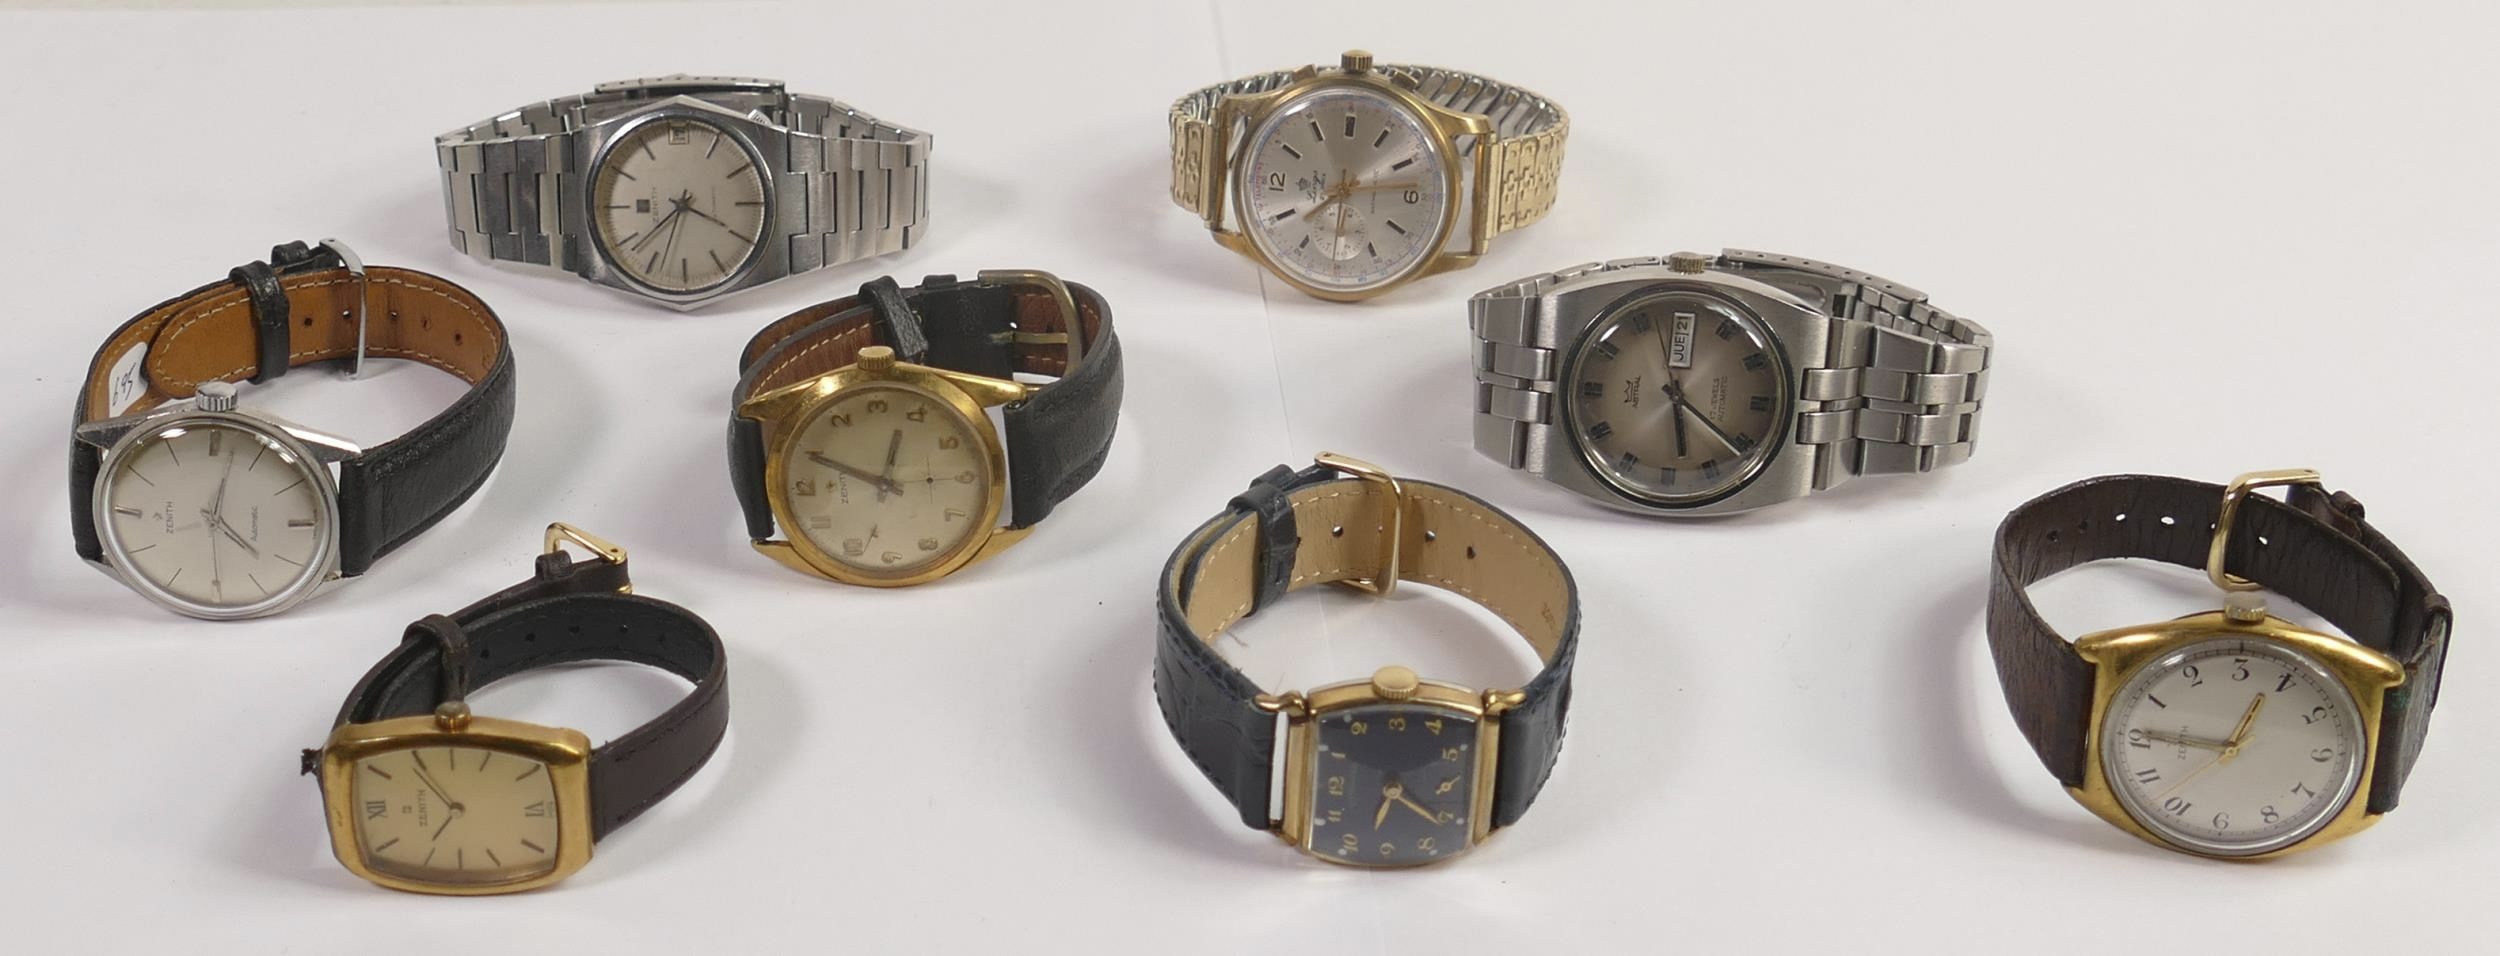 Lot 687 featured 5 vintage Zenith watches, together with a Lings Chronograph, an Astral Gents and a mid-size Witthauer, which sold for £420 altogether.